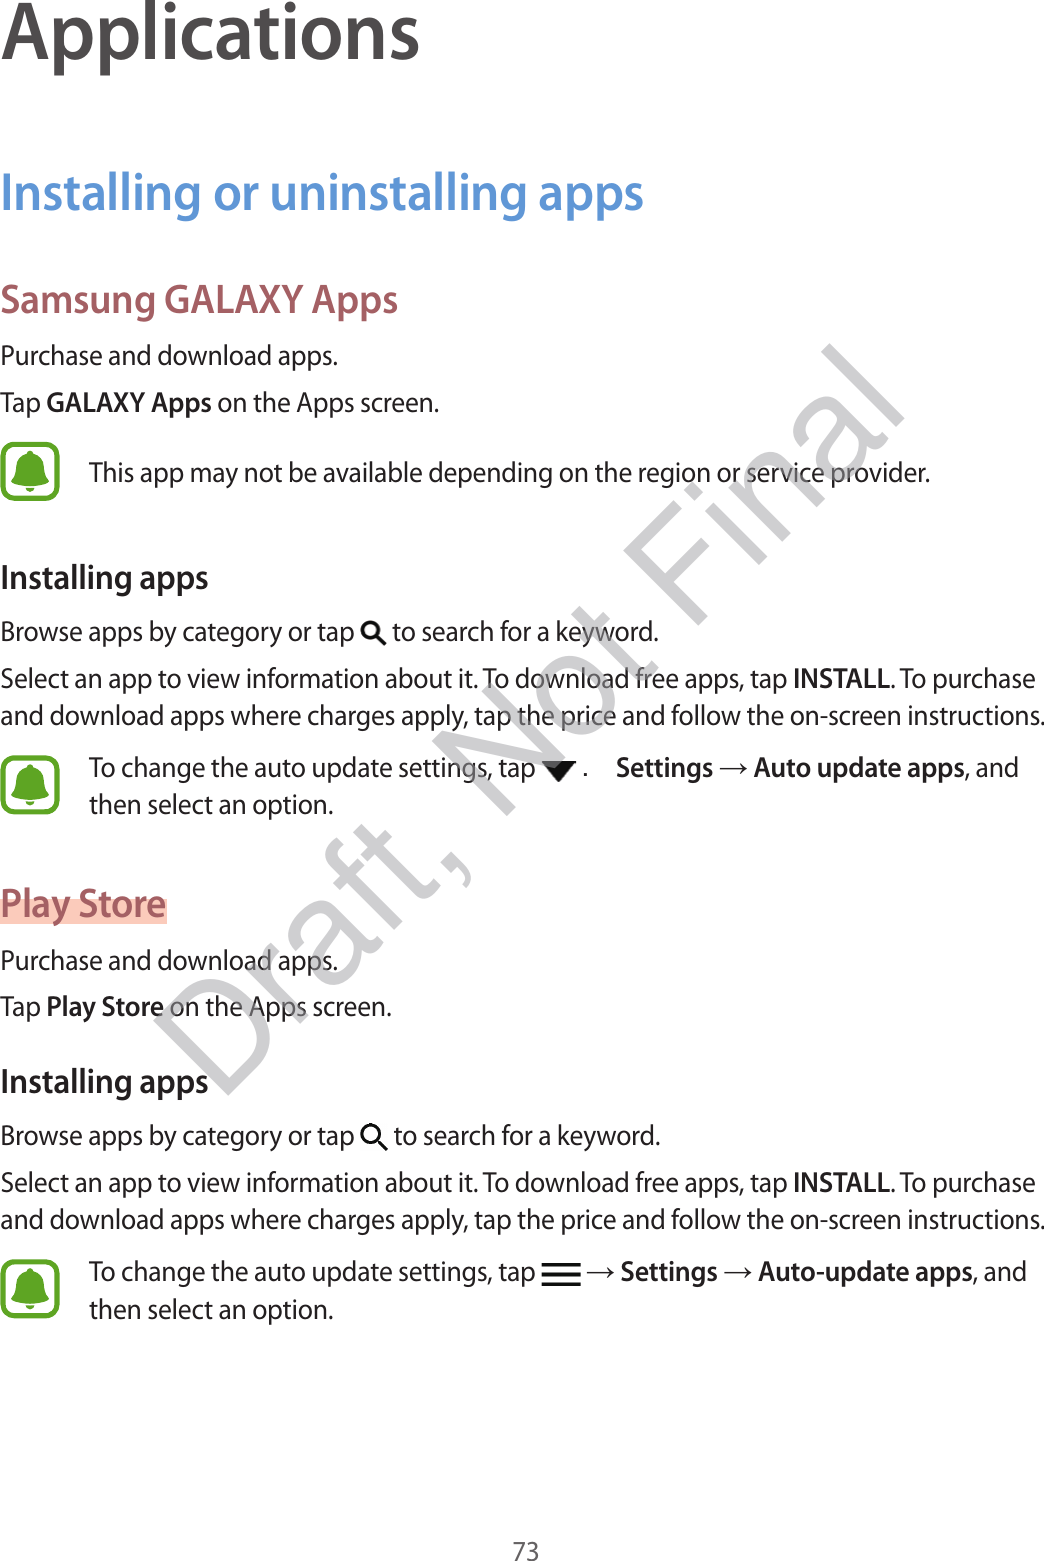 73ApplicationsInstalling or uninstalling appsSamsung GALAXY AppsPurchase and download apps.Tap GALAXY Apps on the Apps screen.This app may not be available depending on the region or service provider.Installing appsBrowse apps by category or tap   to search for a keyword.Select an app to view information about it. To download free apps, tap INSTALL. To purchase and download apps where charges apply, tap the price and follow the on-screen instructions.To change the auto update settings, tap   . Settings  Auto update apps, and then select an option.Play StorePurchase and download apps.Tap Play Store on the Apps screen.Installing appsBrowse apps by category or tap   to search for a keyword.Select an app to view information about it. To download free apps, tap INSTALL. To purchase and download apps where charges apply, tap the price and follow the on-screen instructions.To change the auto update settings, tap    Settings  Auto-update apps, and then select an option.Draft, Not Final